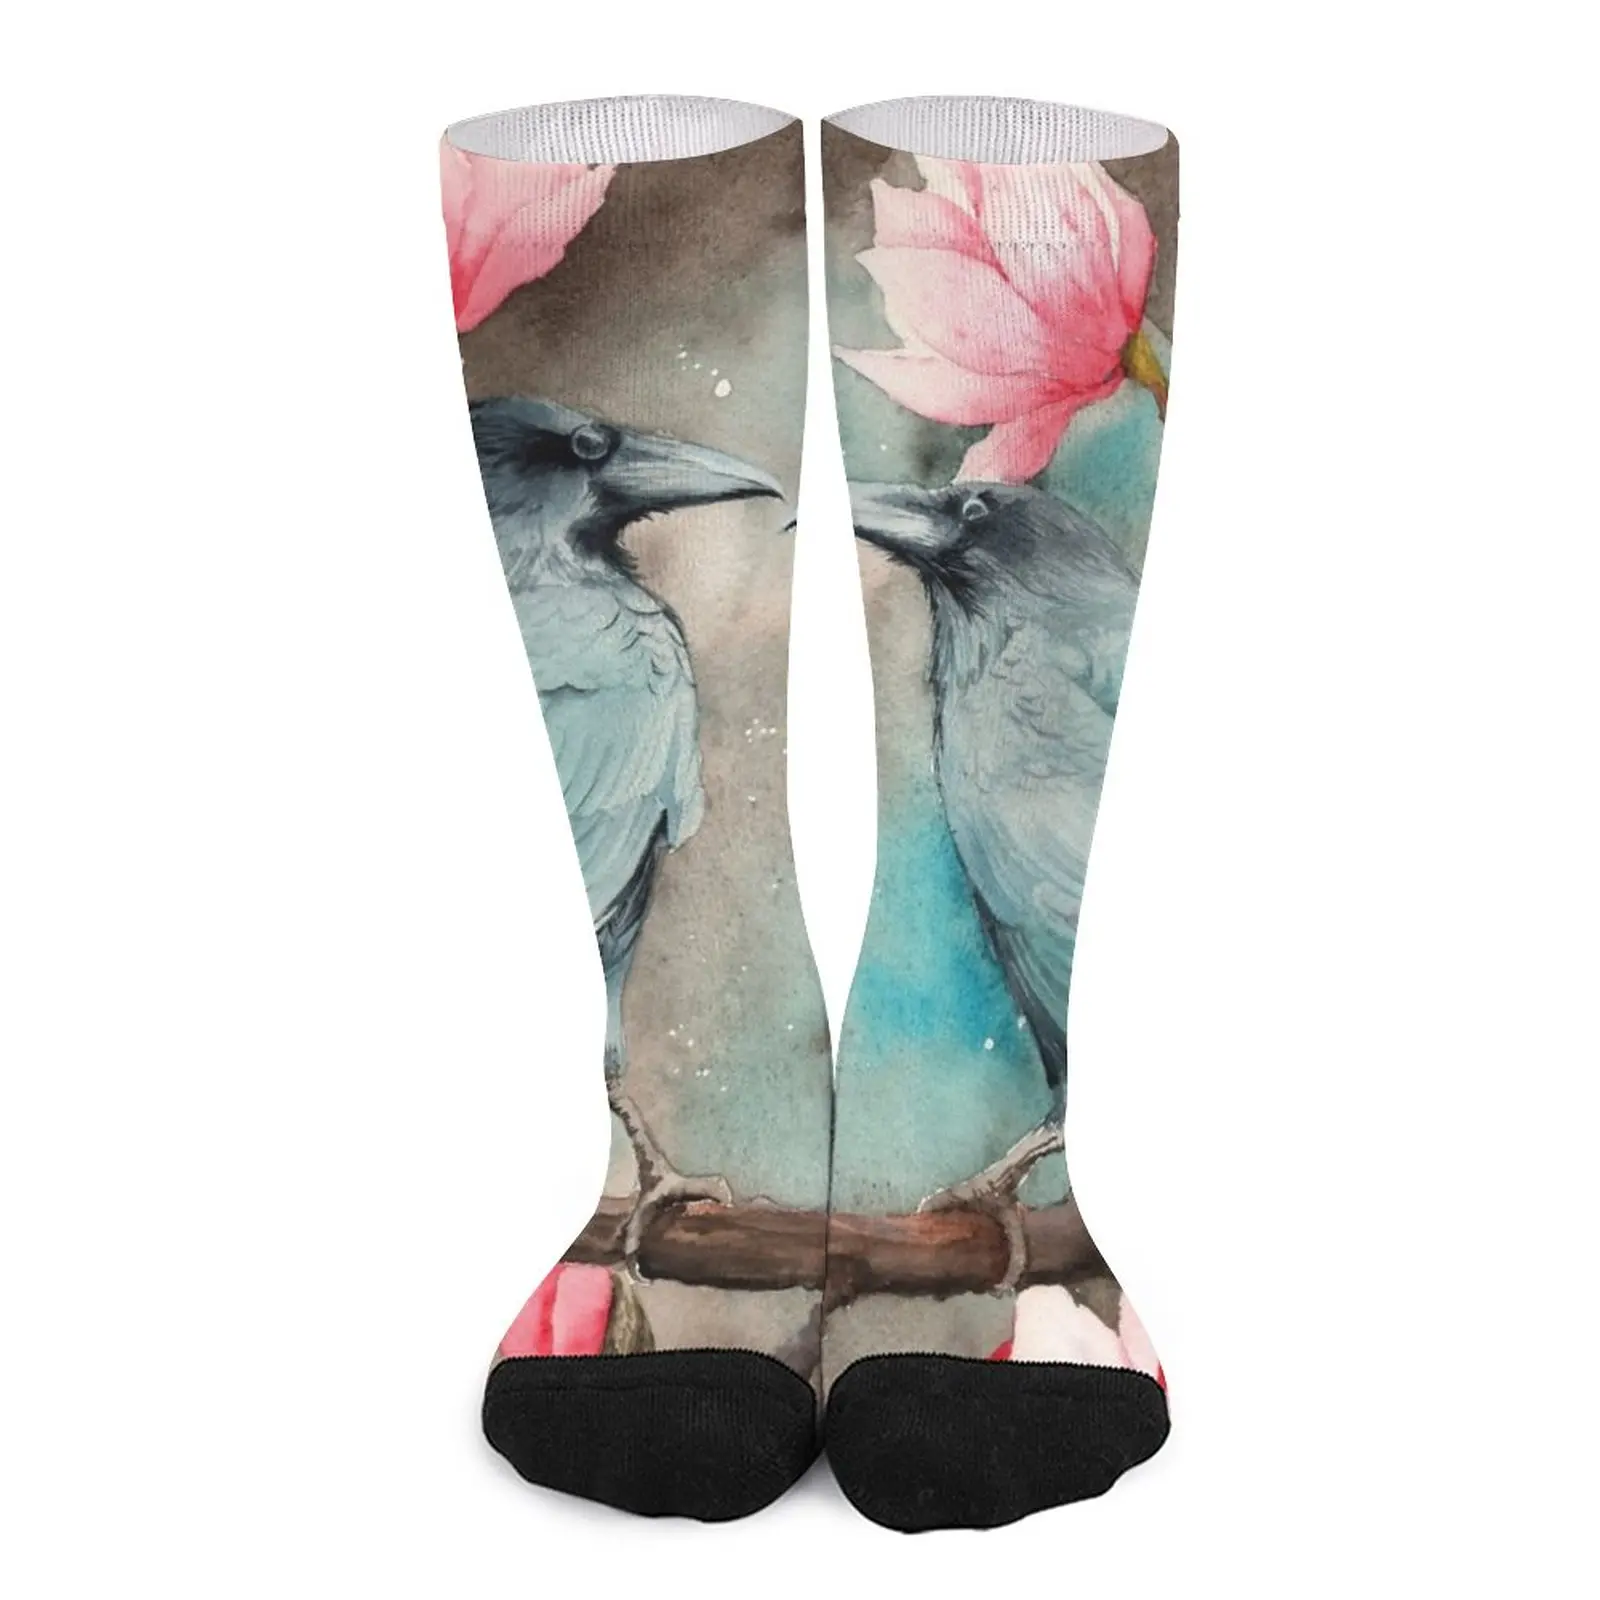 Watercolor picture of two ravens on the magnolia Socks Sports socks cartoon socks pomni the amazing digital circus backpack middle high college school student clown cartoon bookbag teens canvas daypack sports